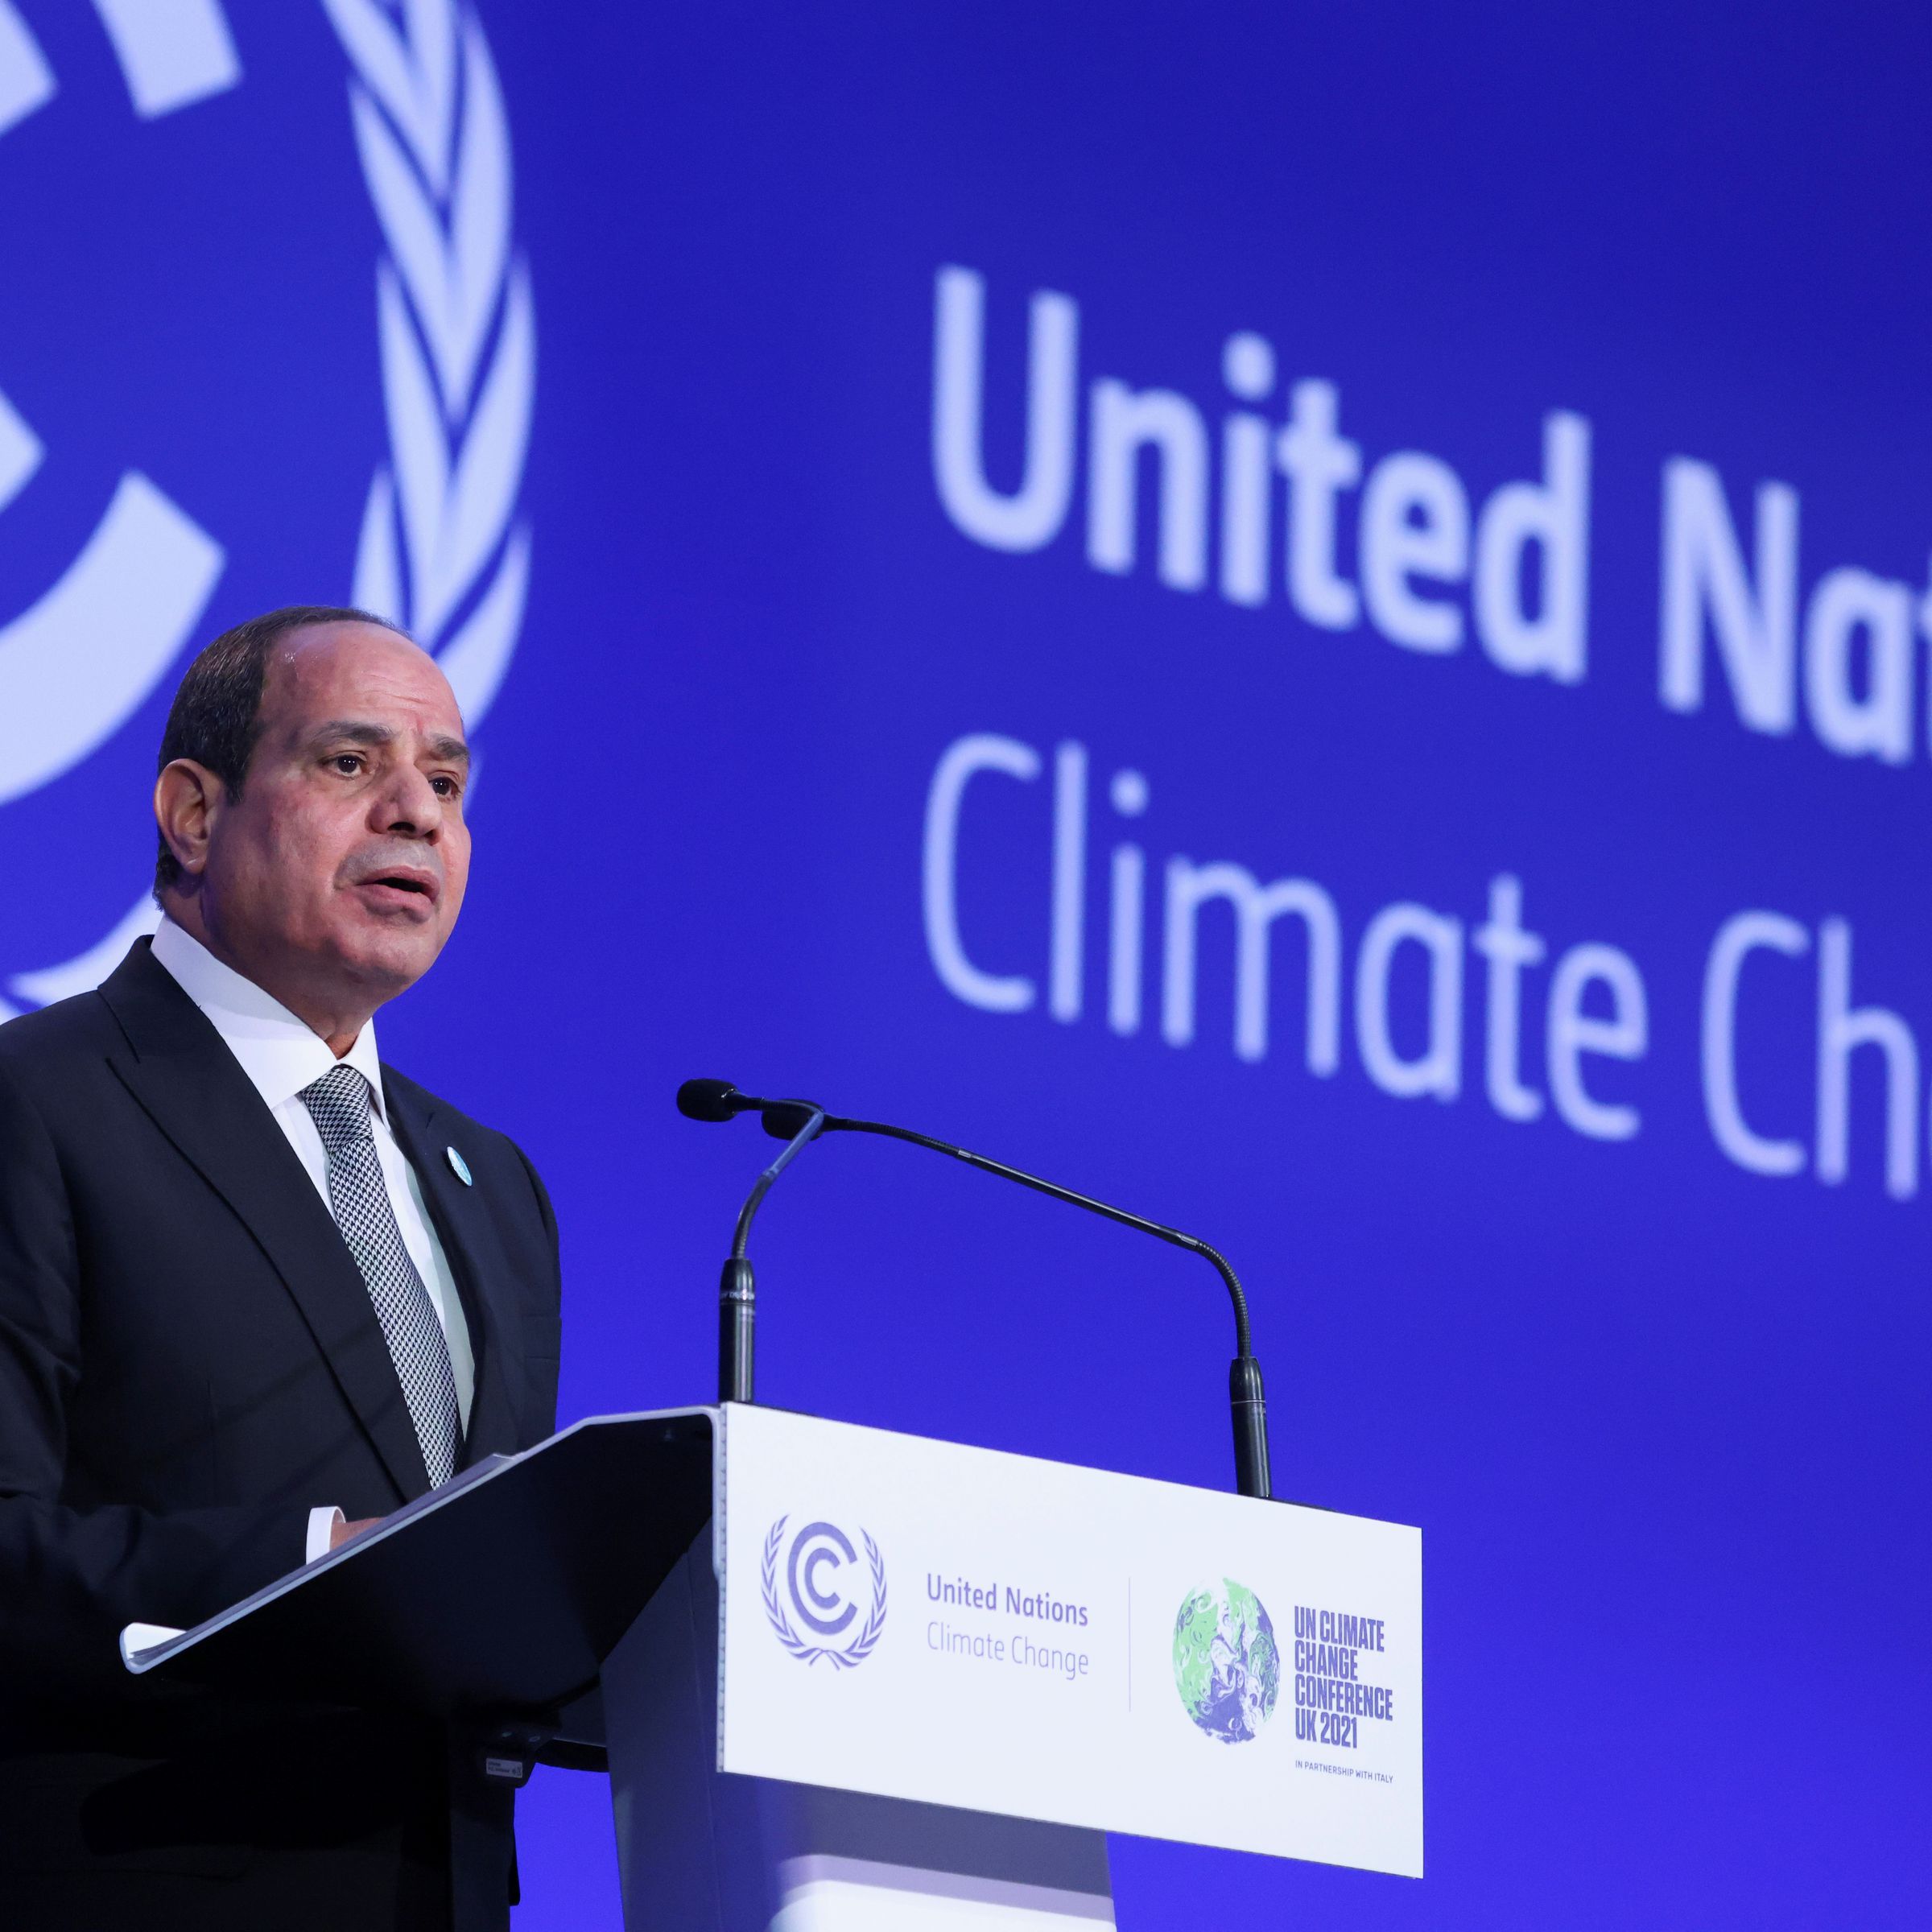 Egypt President Abdel Fattah al-Sisi speaking during the UN Climate Change Conference COP26